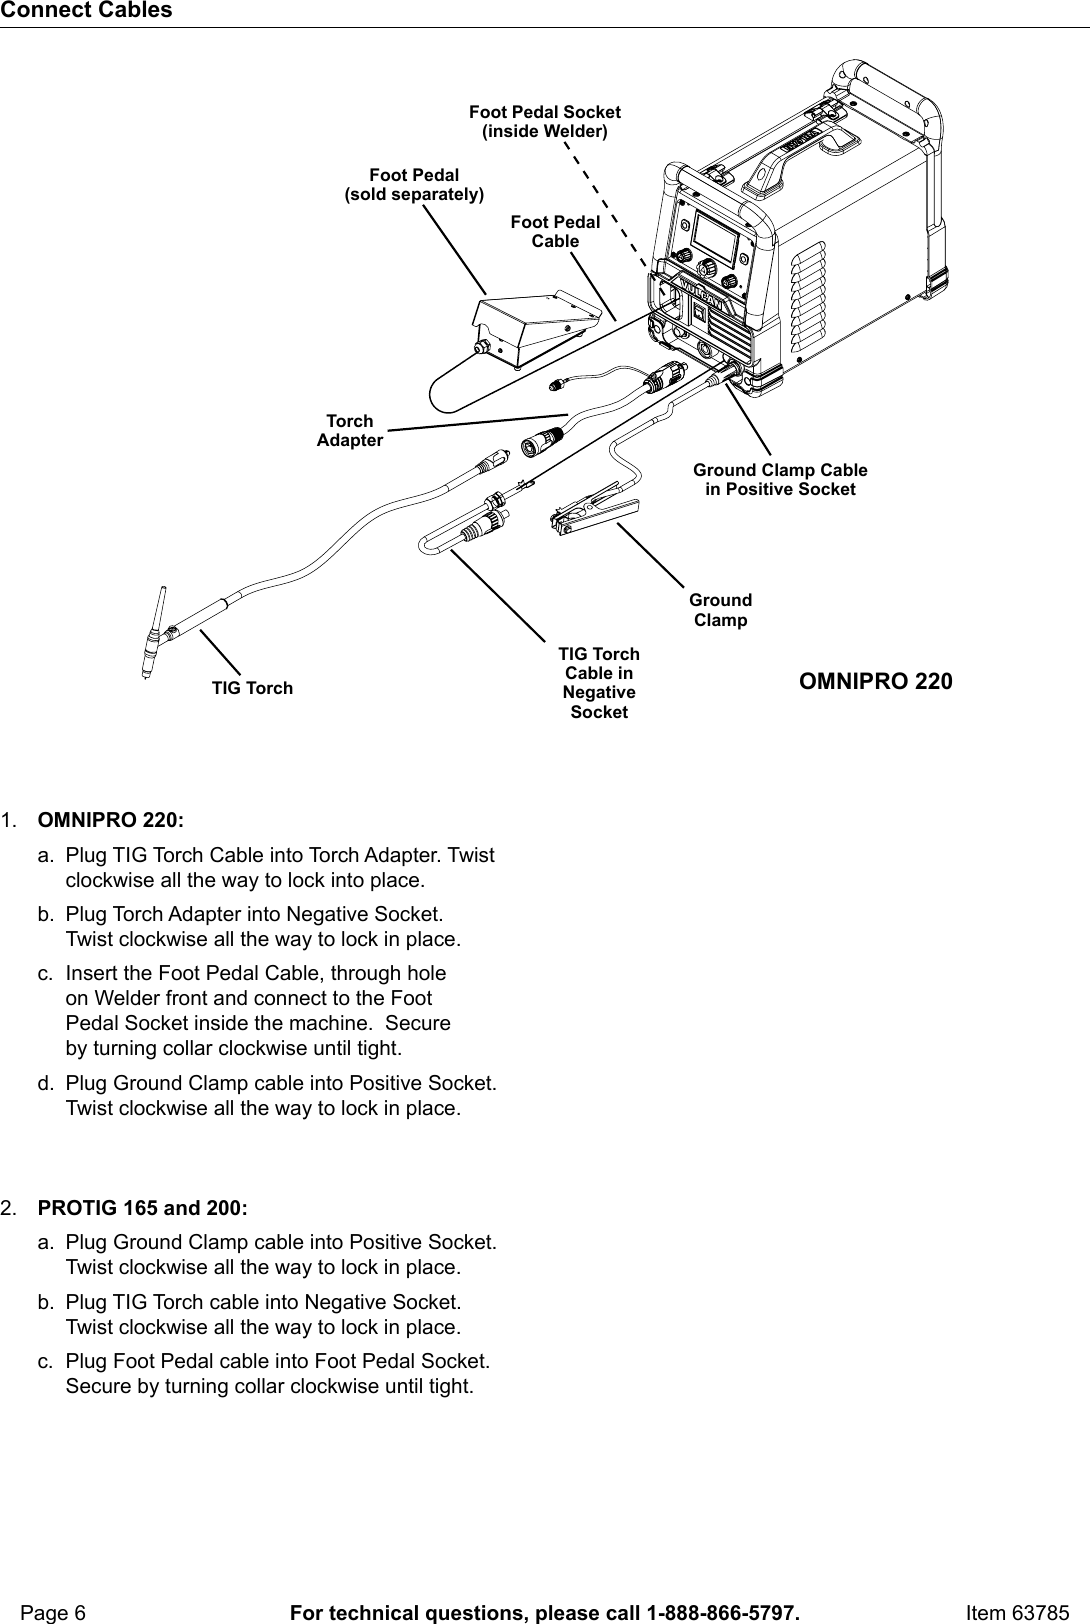 Page 6 of 12 - Manual For The 63785 150A TIG Torch